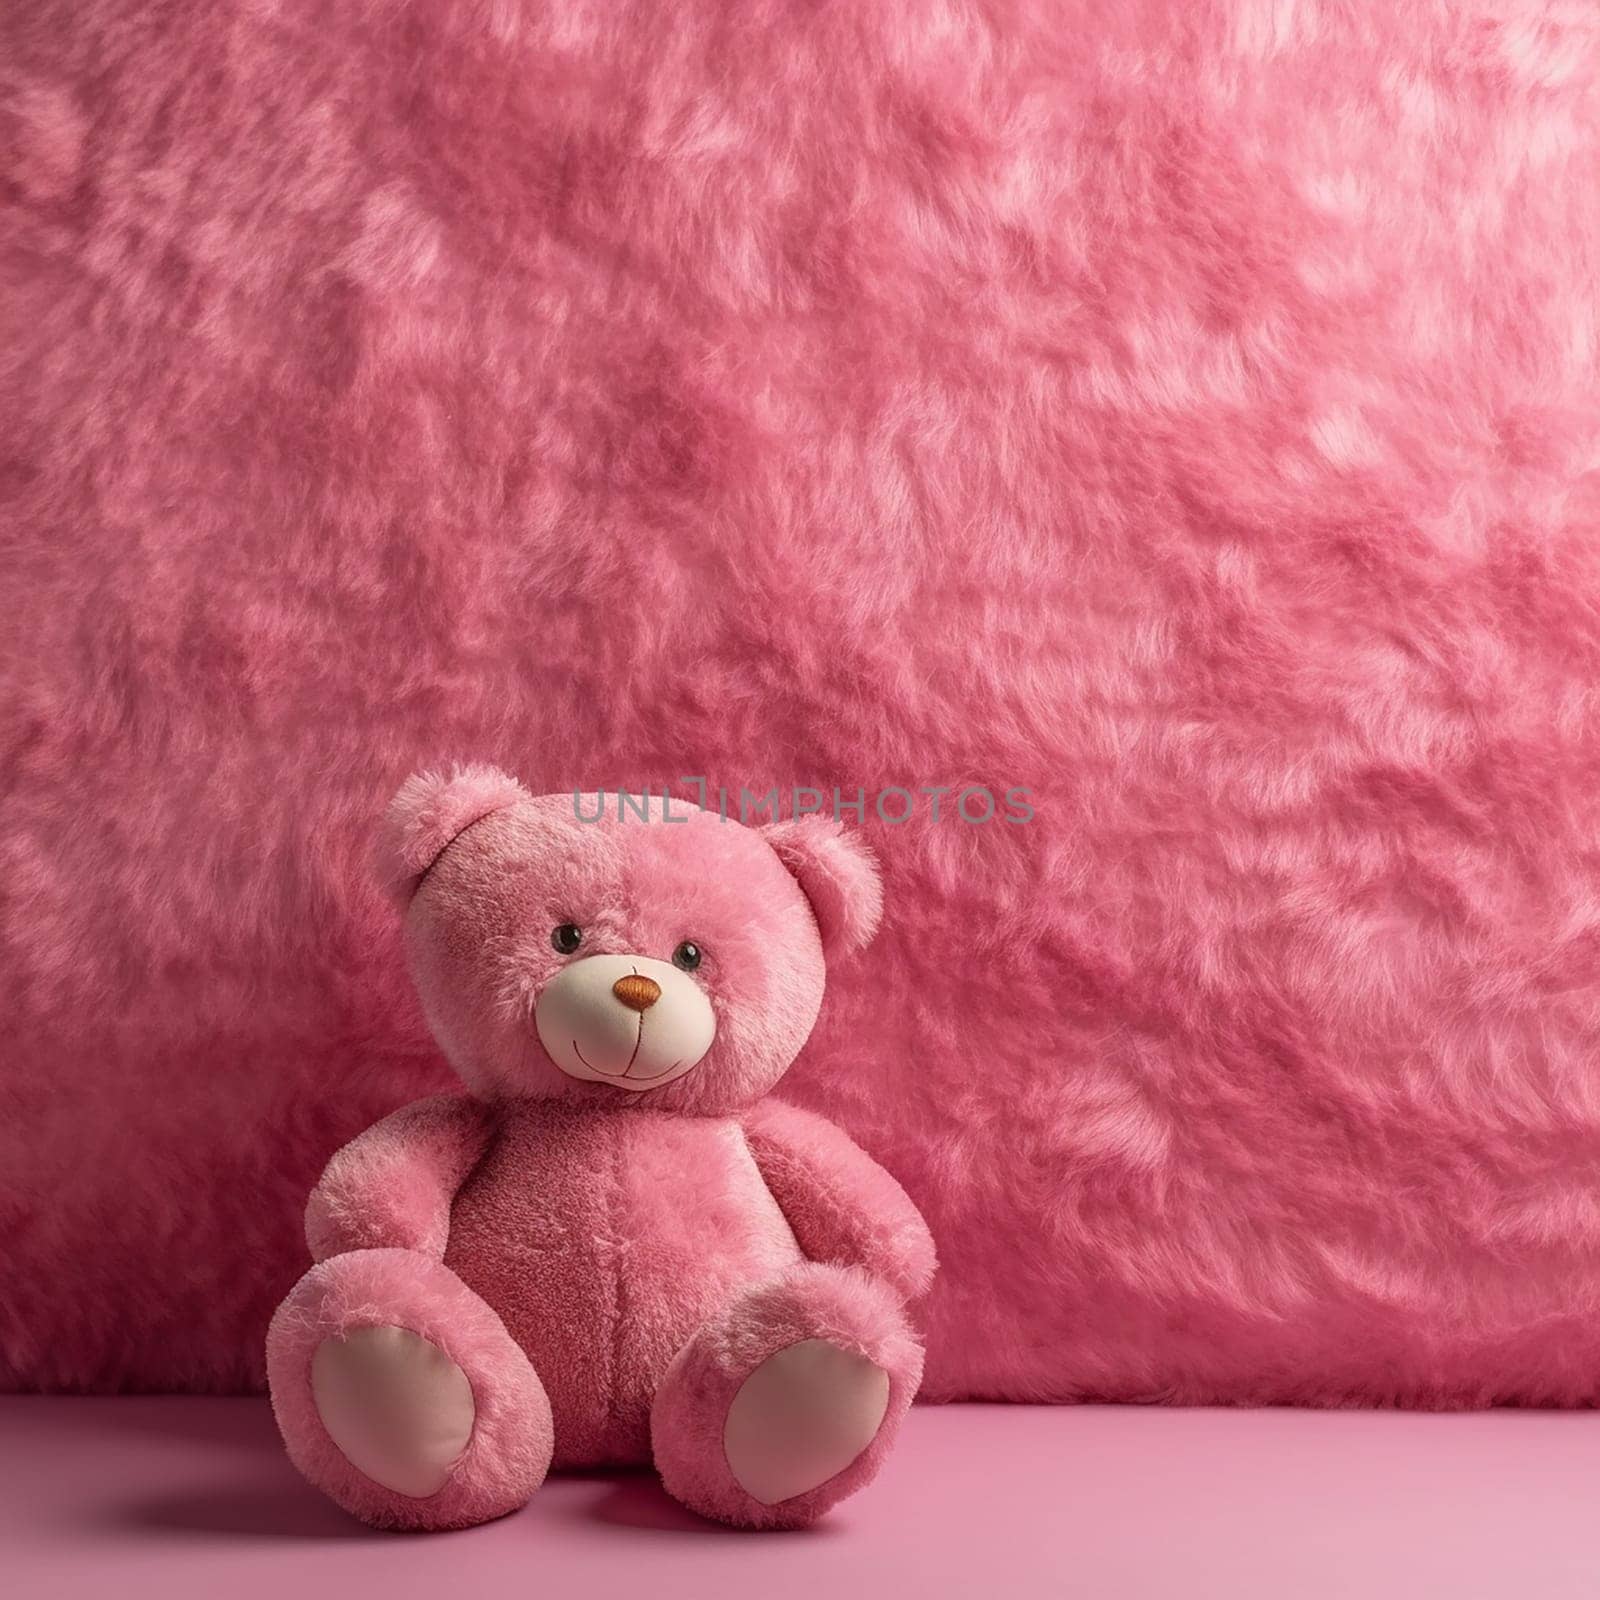 A pink teddy bear sits against a pink fluffy background. by Hype2art